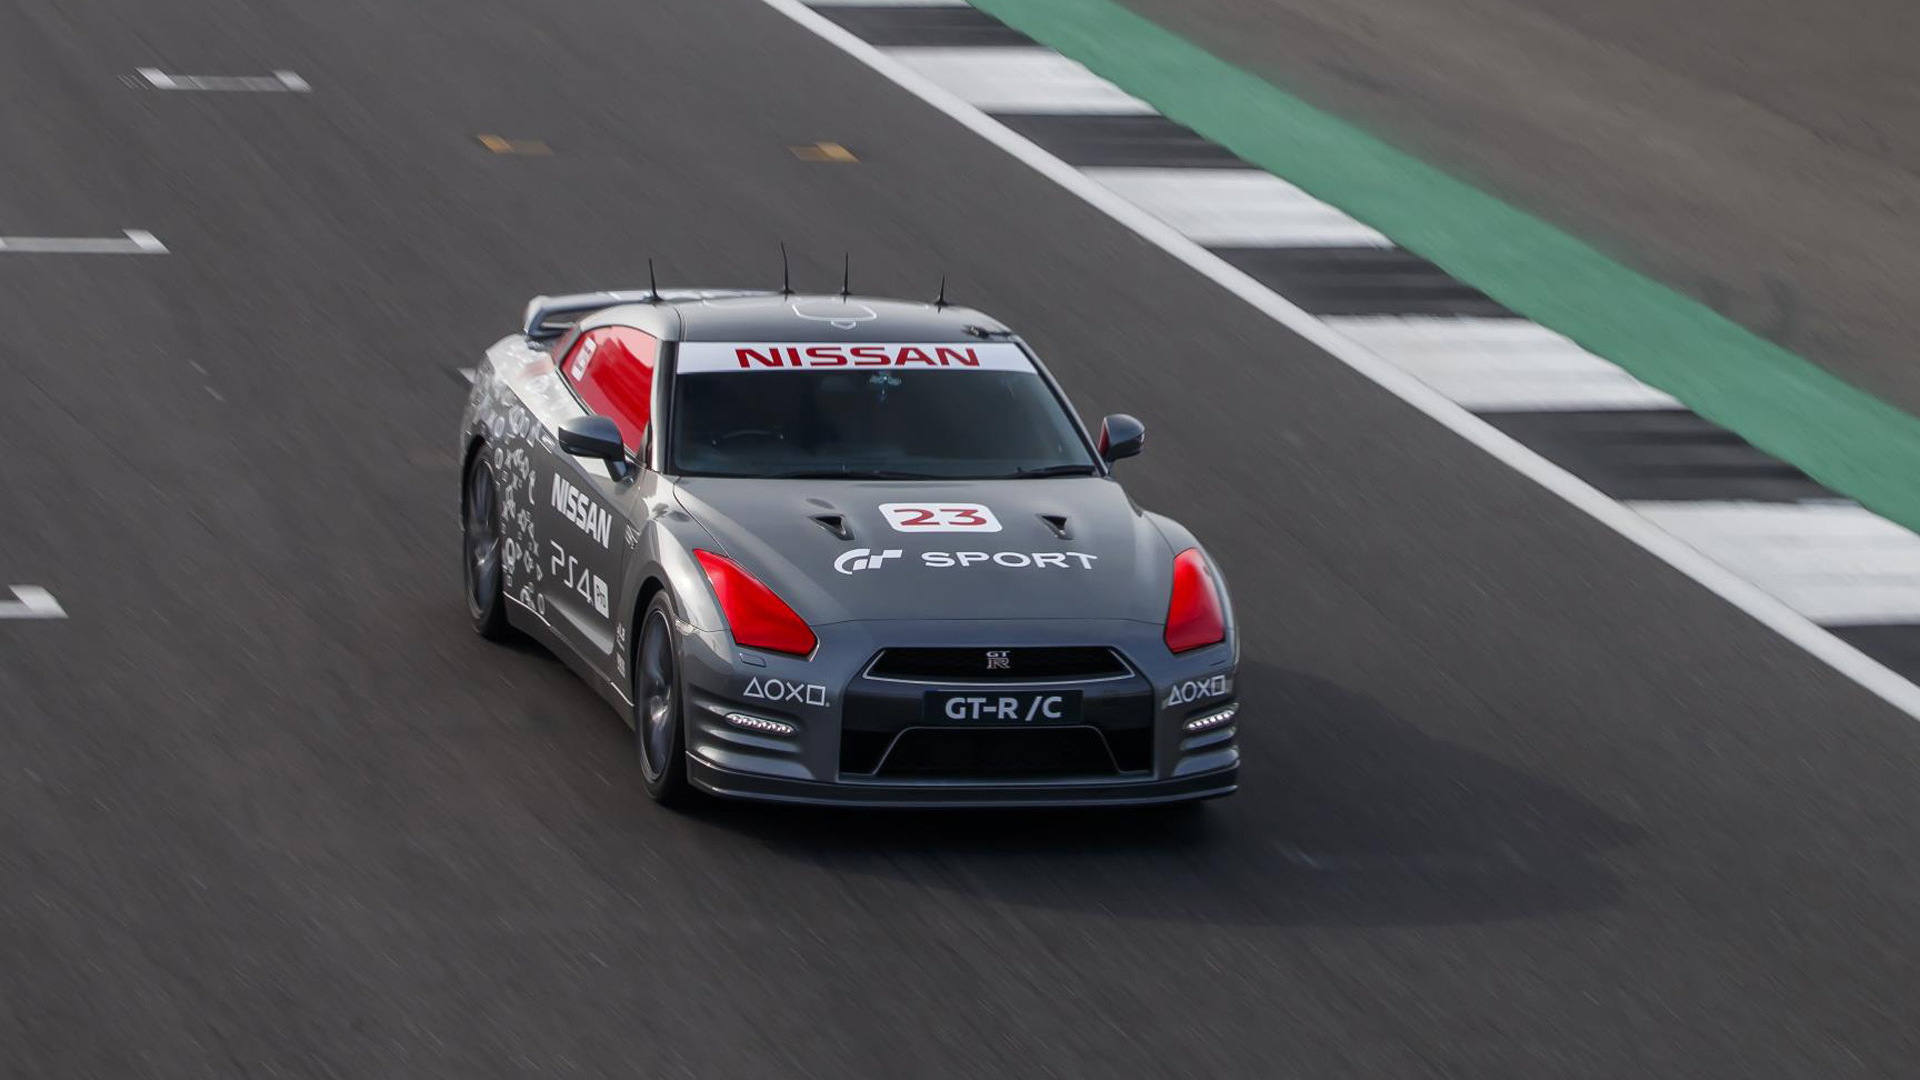 Jann Mardenborough drives a Nissan GT-R around a racetrack with a video game control